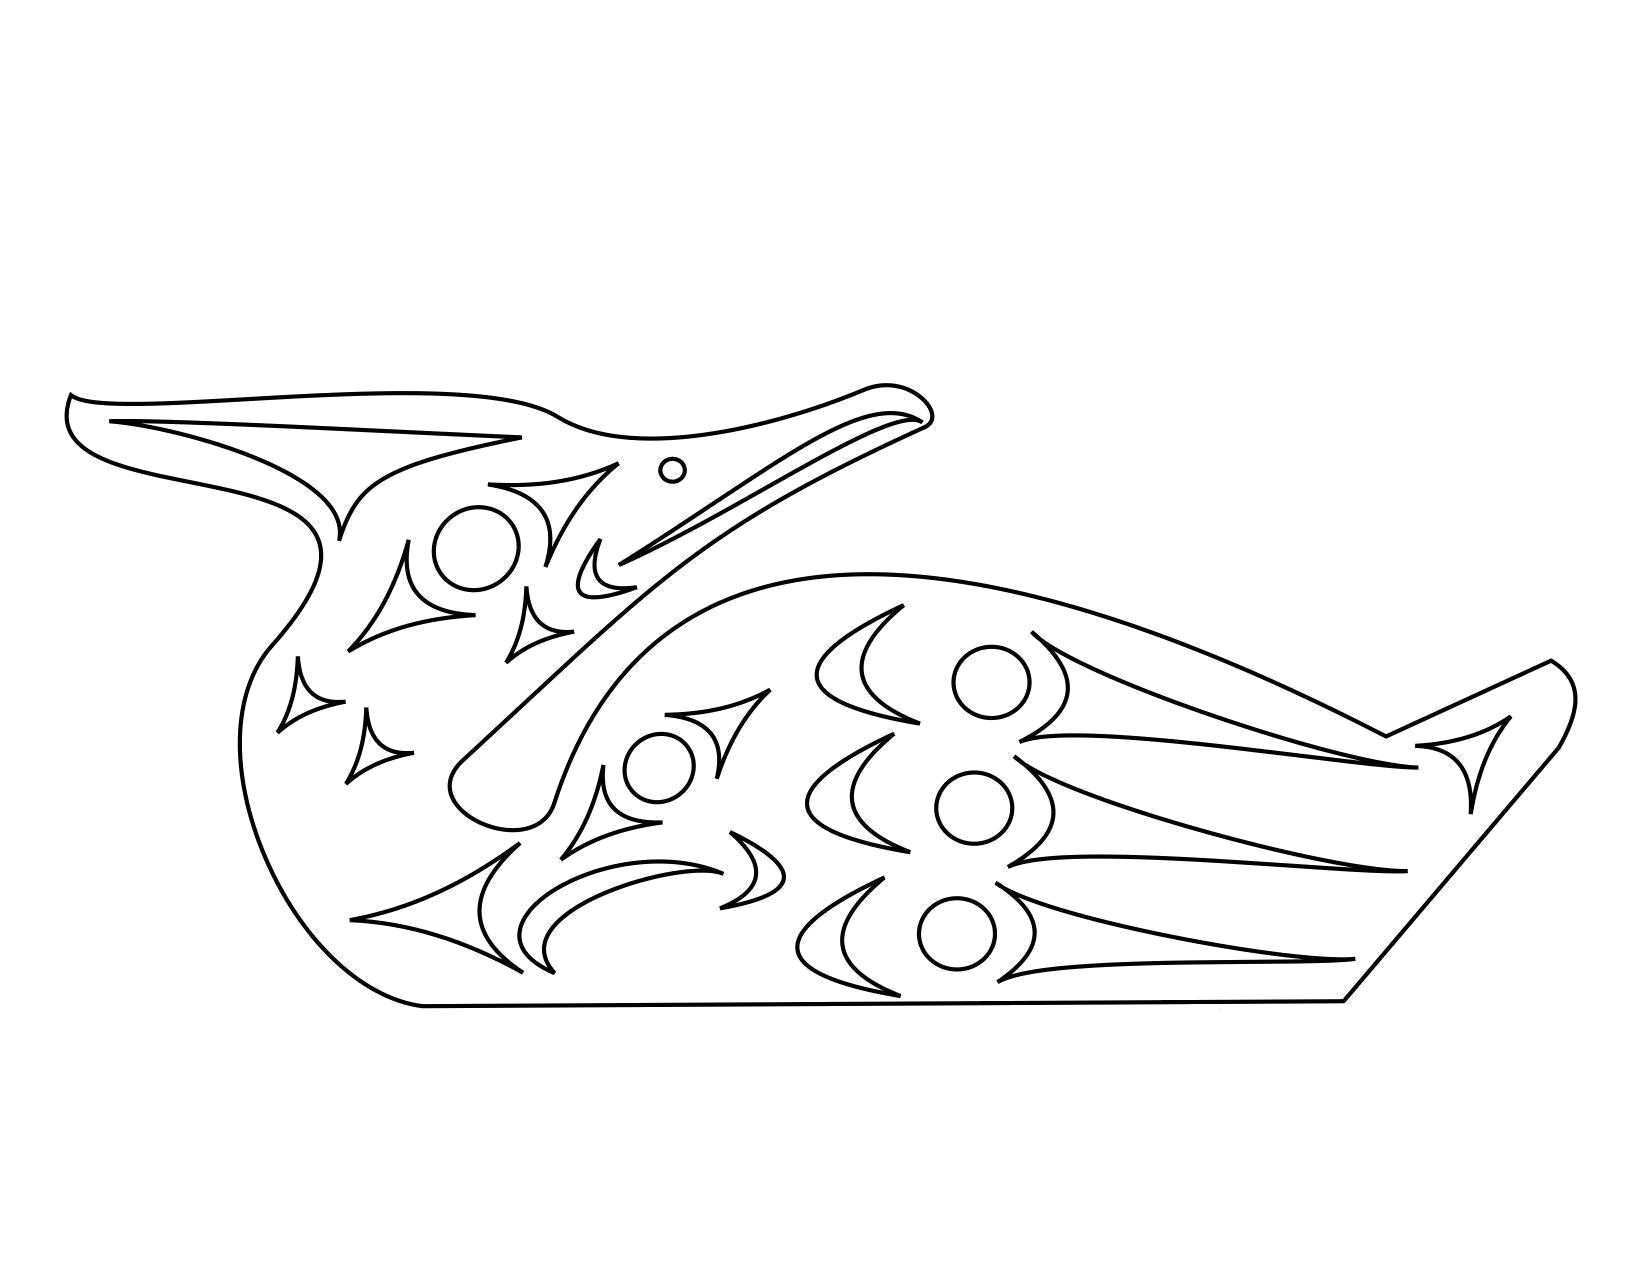 Coloring Bird in the nest. Category The contours for cutting out the birds. Tags:  bird.